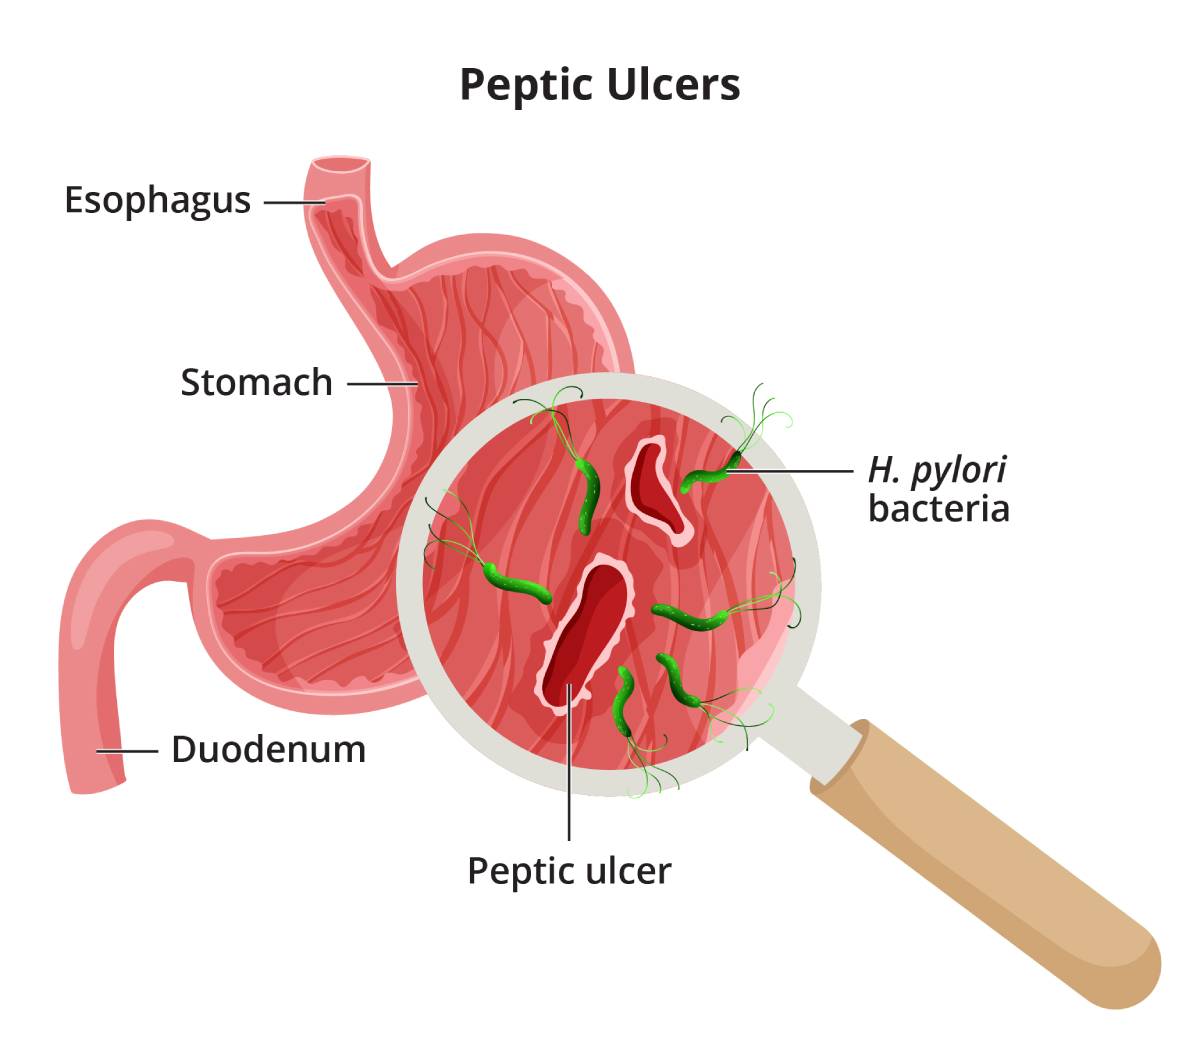 A close-up of peptic ulcers, showing damage to the stomach lining caused by H. pylori bacteria.